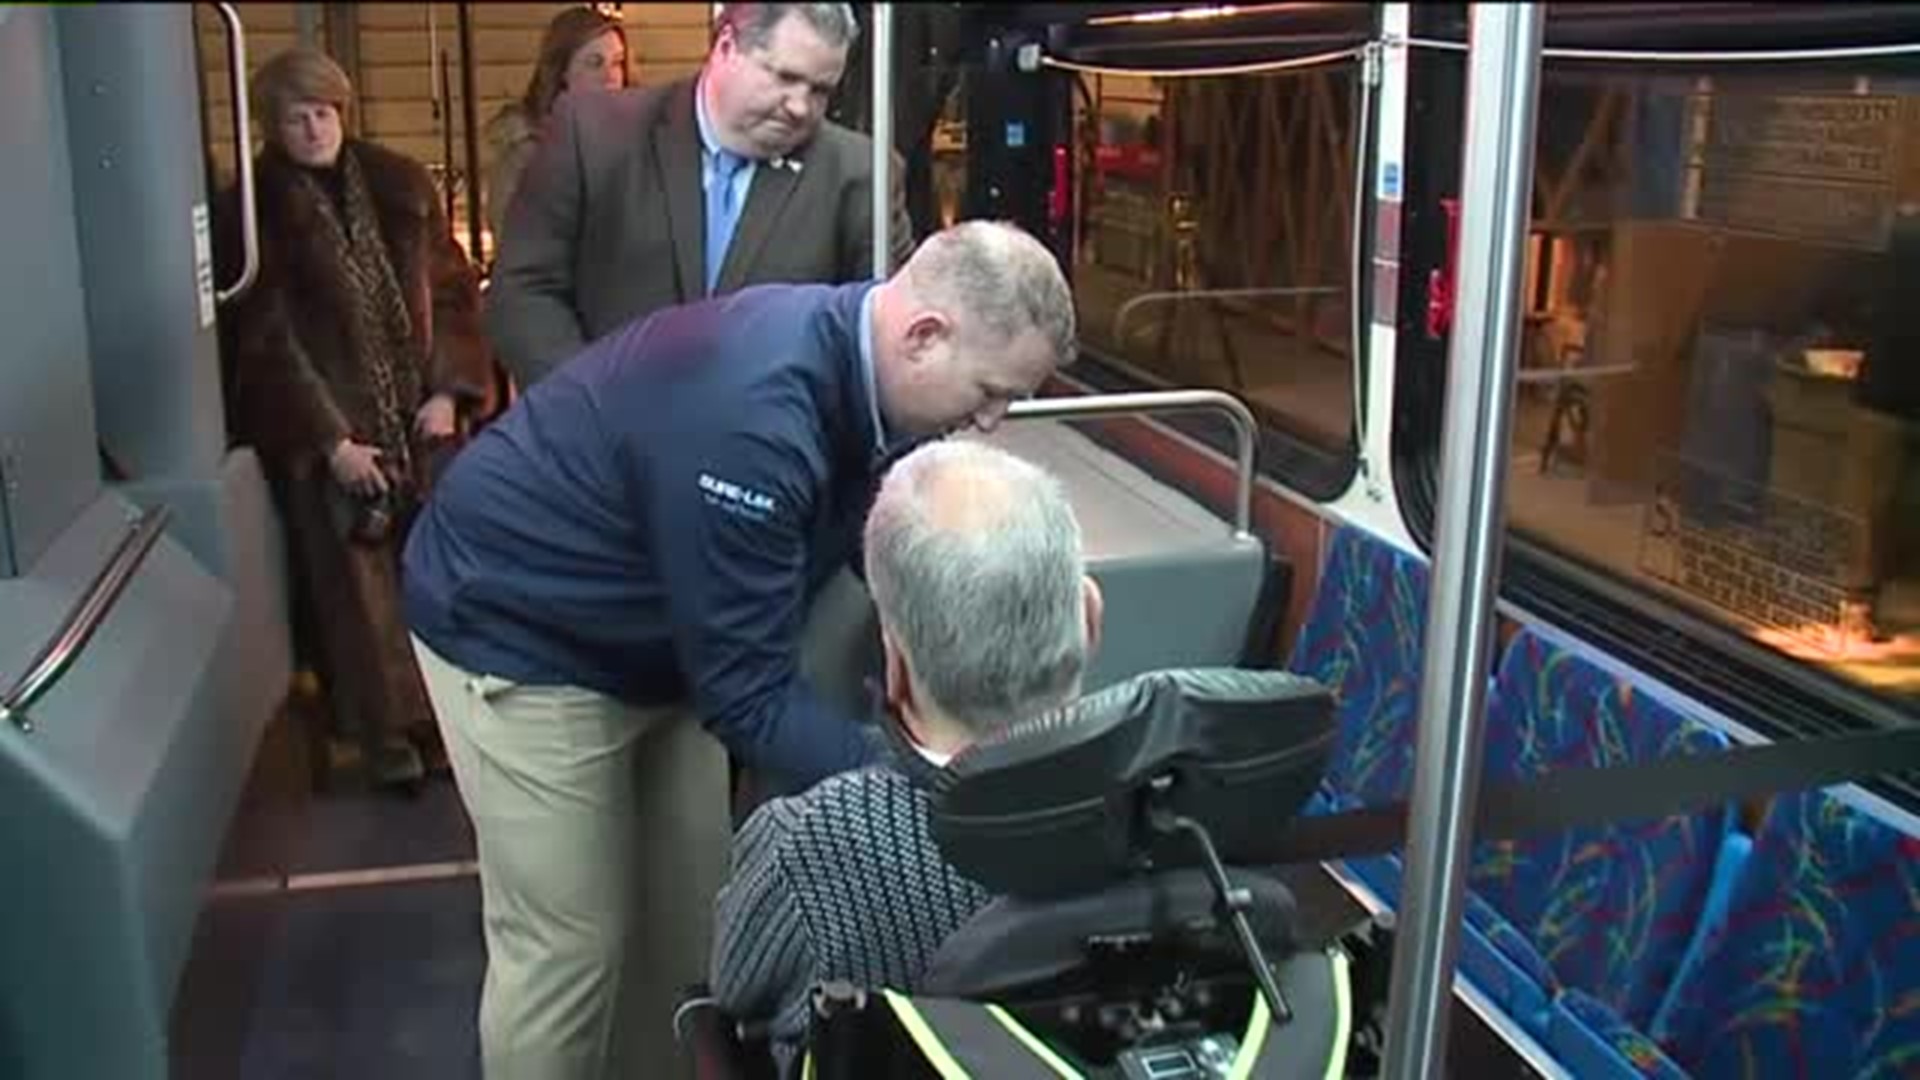 COLTS Buses Become More Accessible